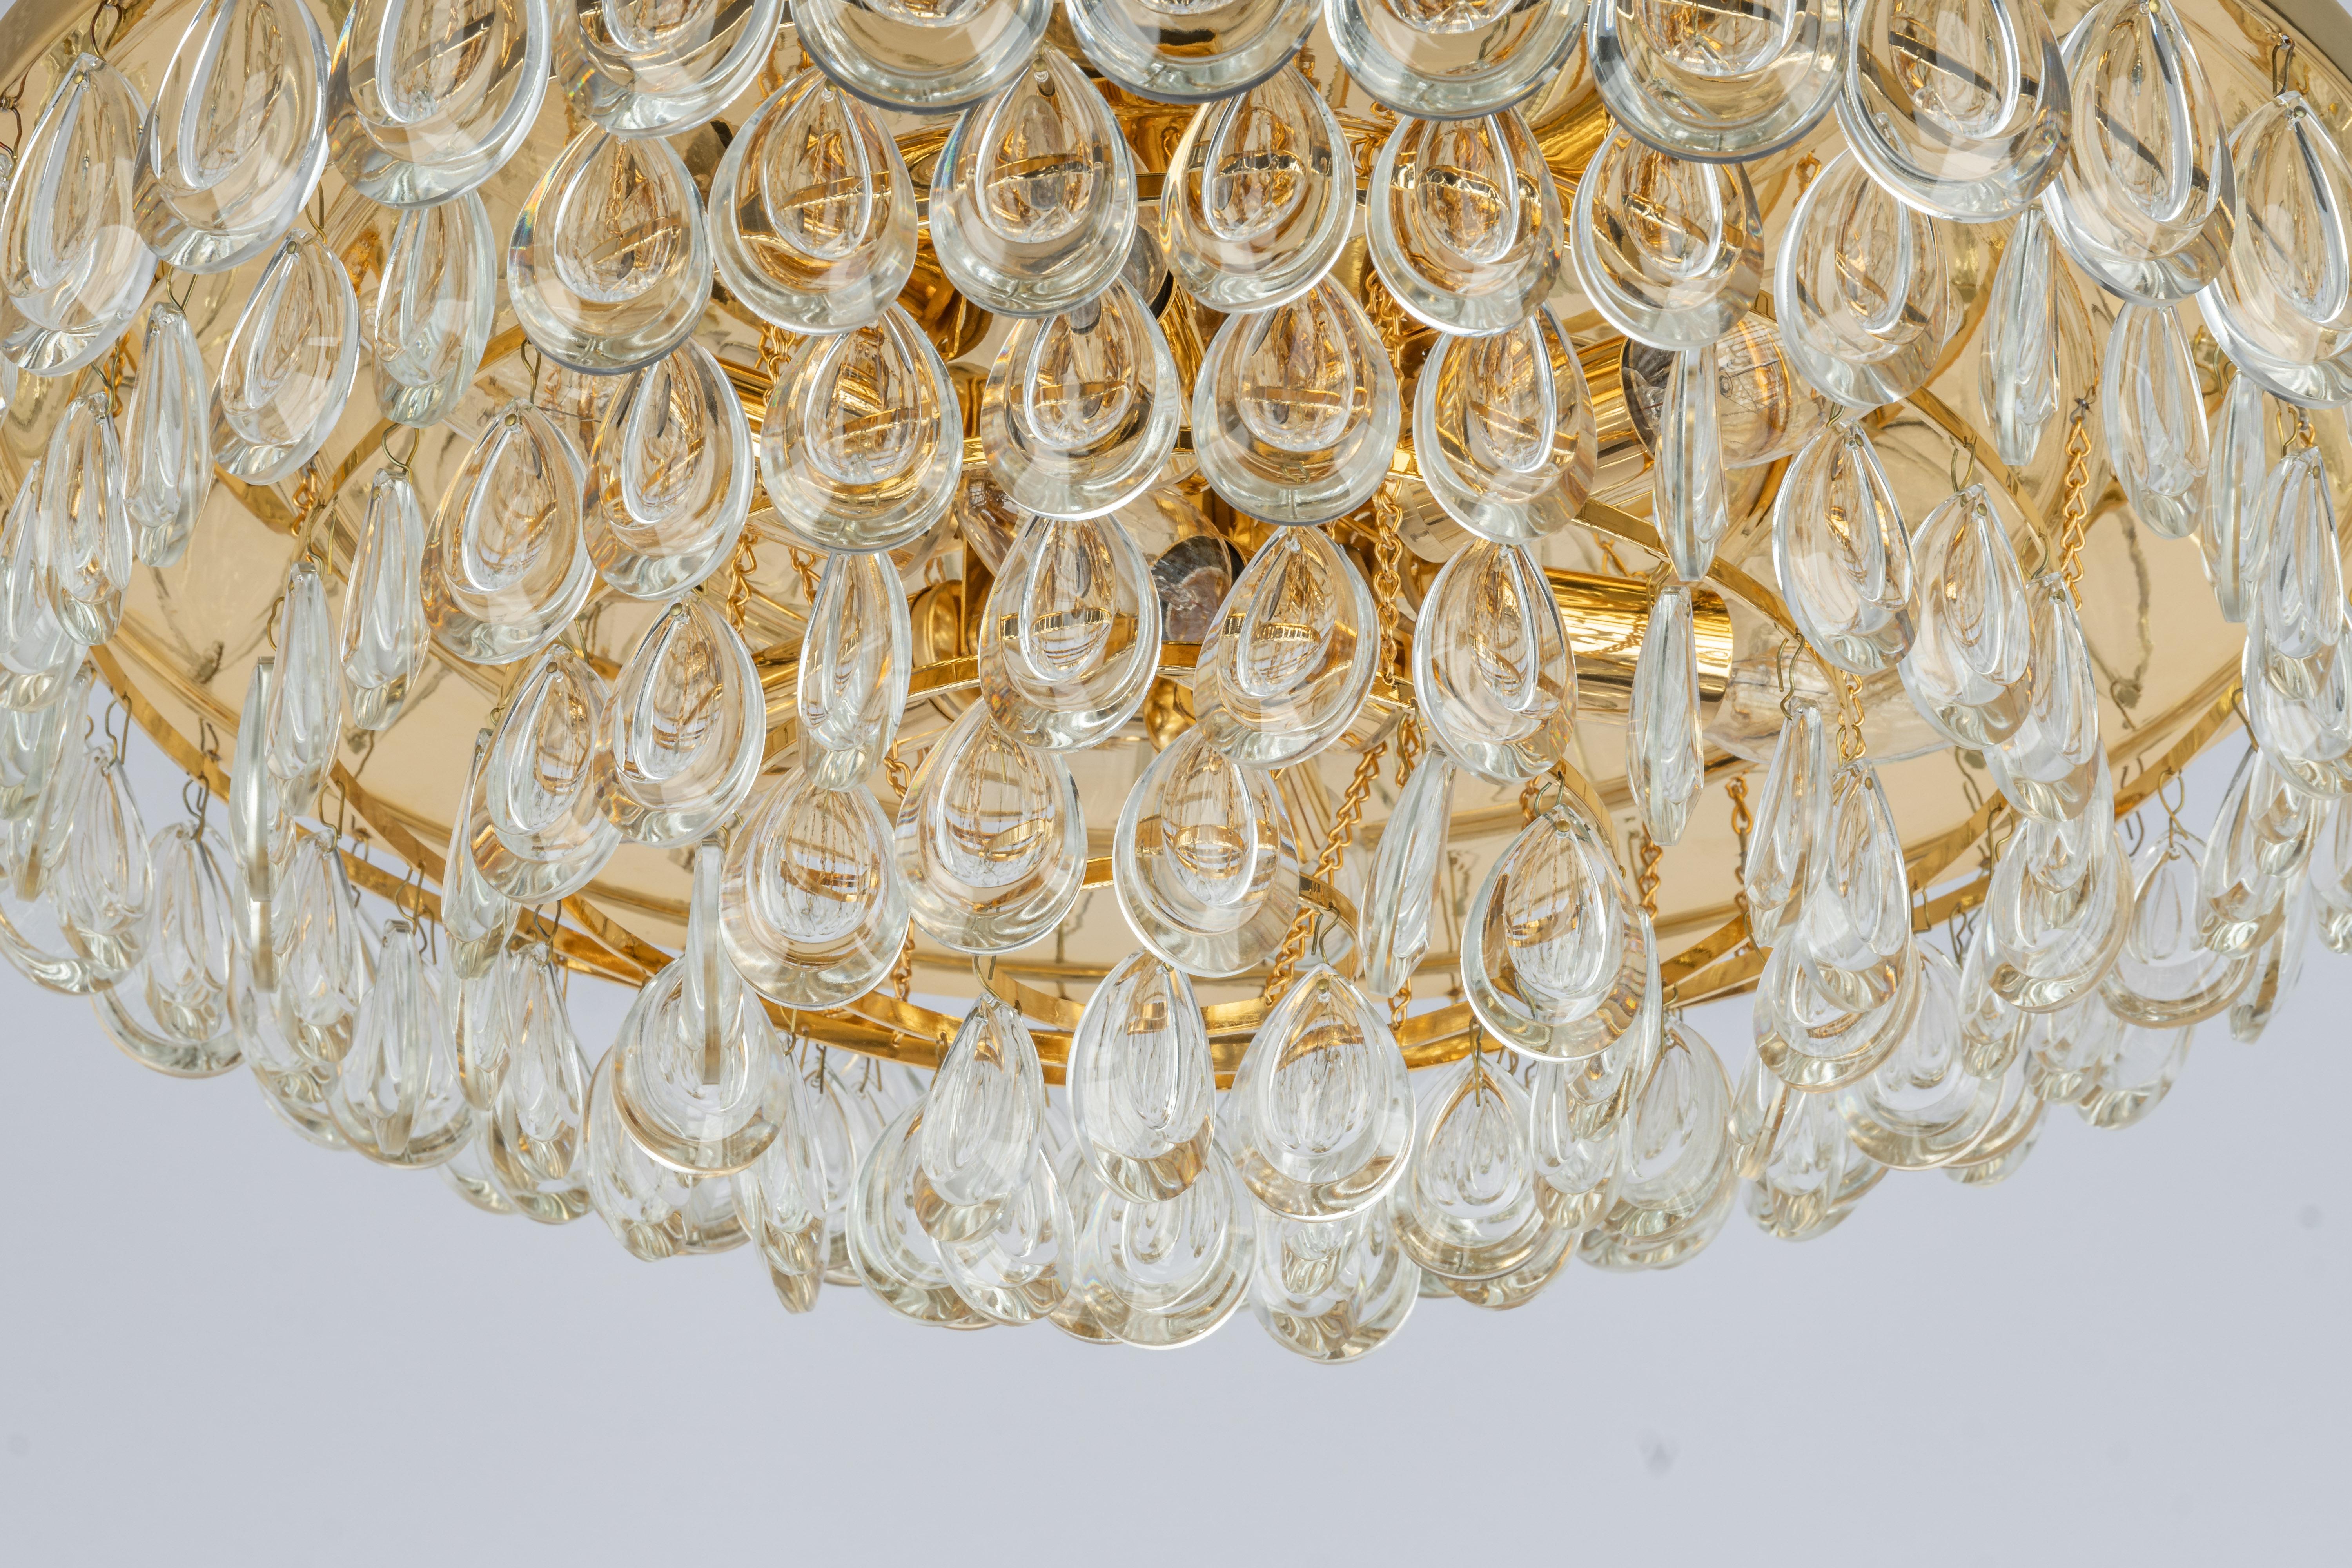 A wonderful and high-quality gilded chandelier or pendant light fixture by Palwa , Germany, 1970s.
It is made of a 24-carat gold-plated brass frame decorated with individual 